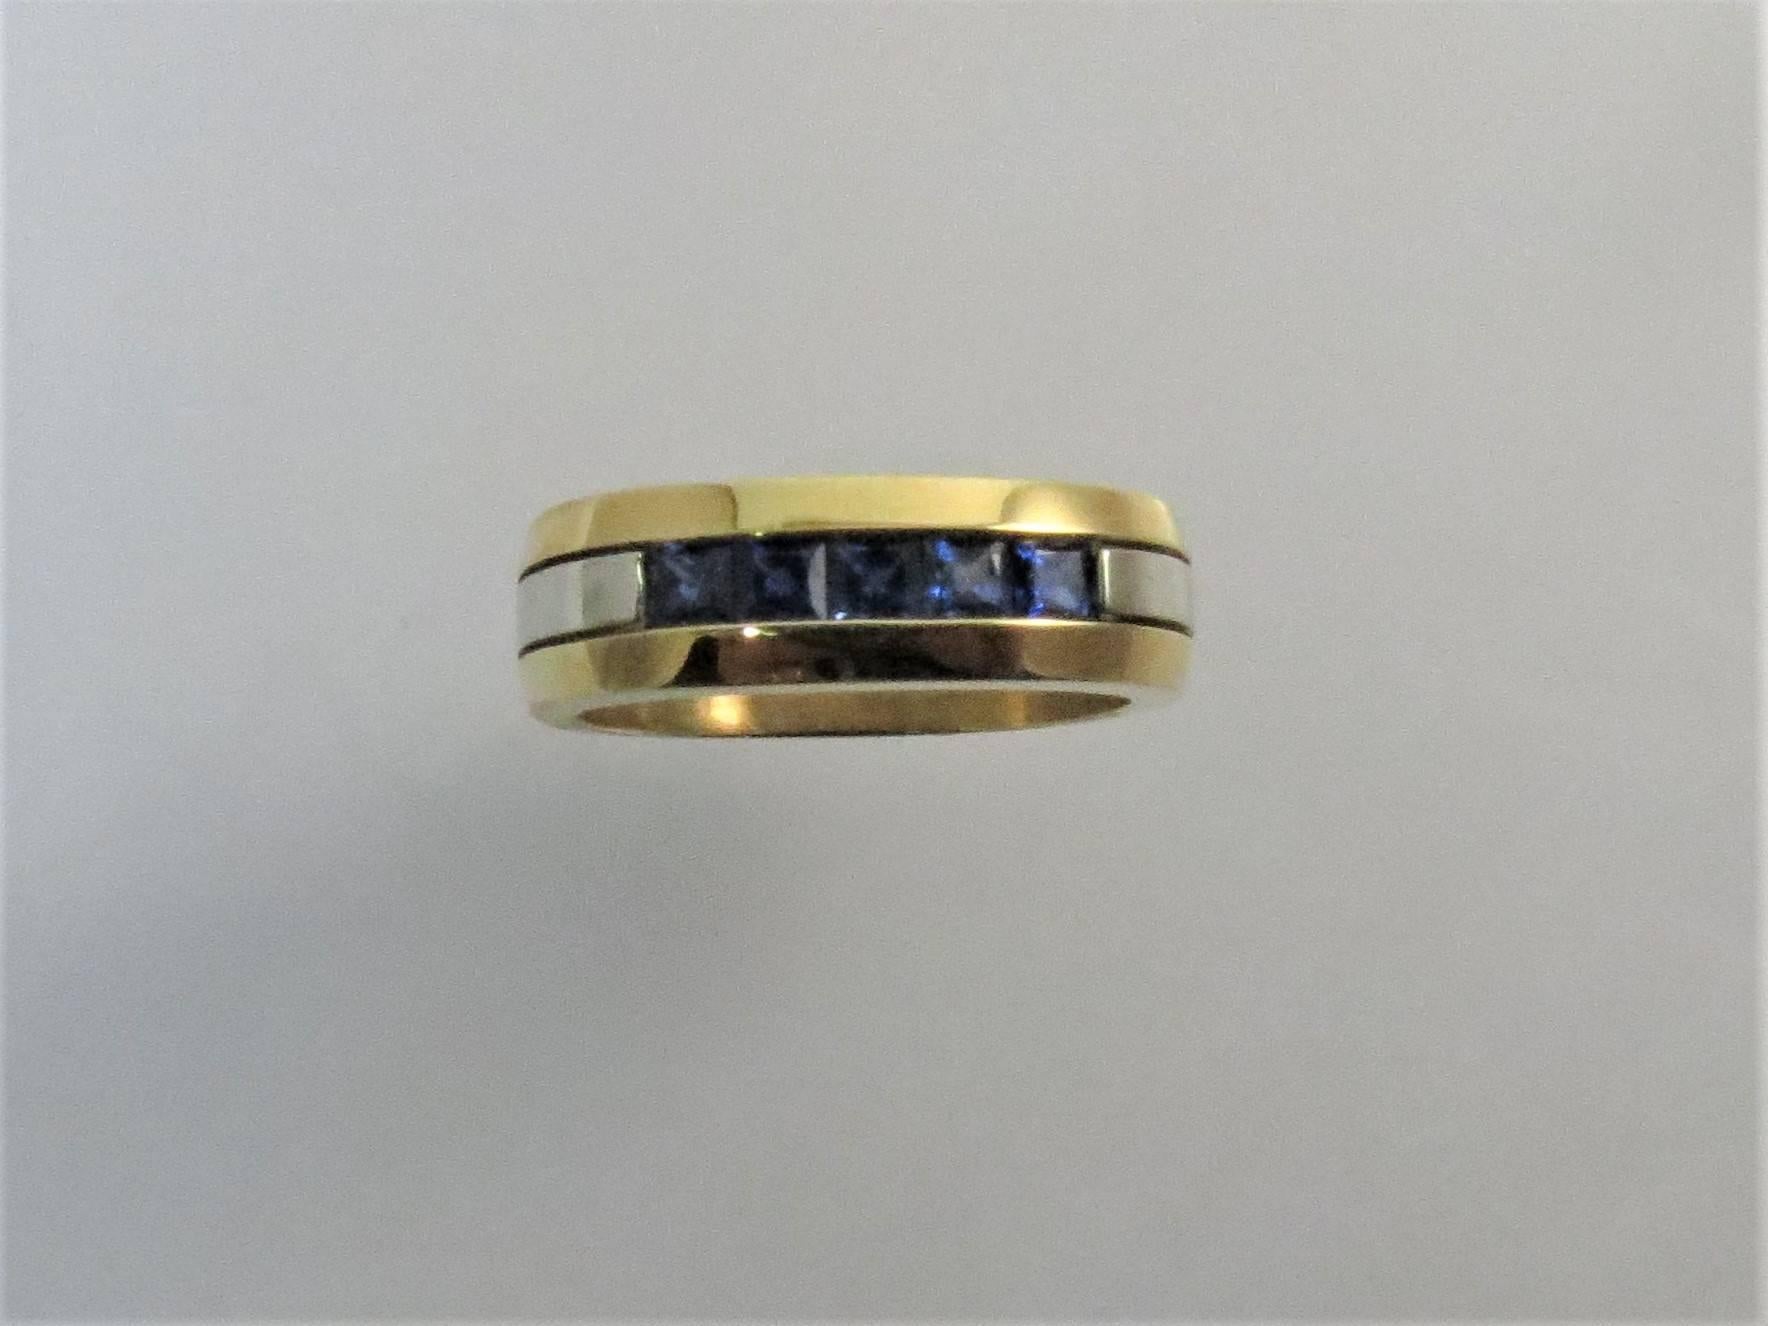 Gents 18K yellow gold and 18K white gold band ring, set with 5 square cut blue sapphires weighing .88cts total. 
Size 9.5, may be sized.